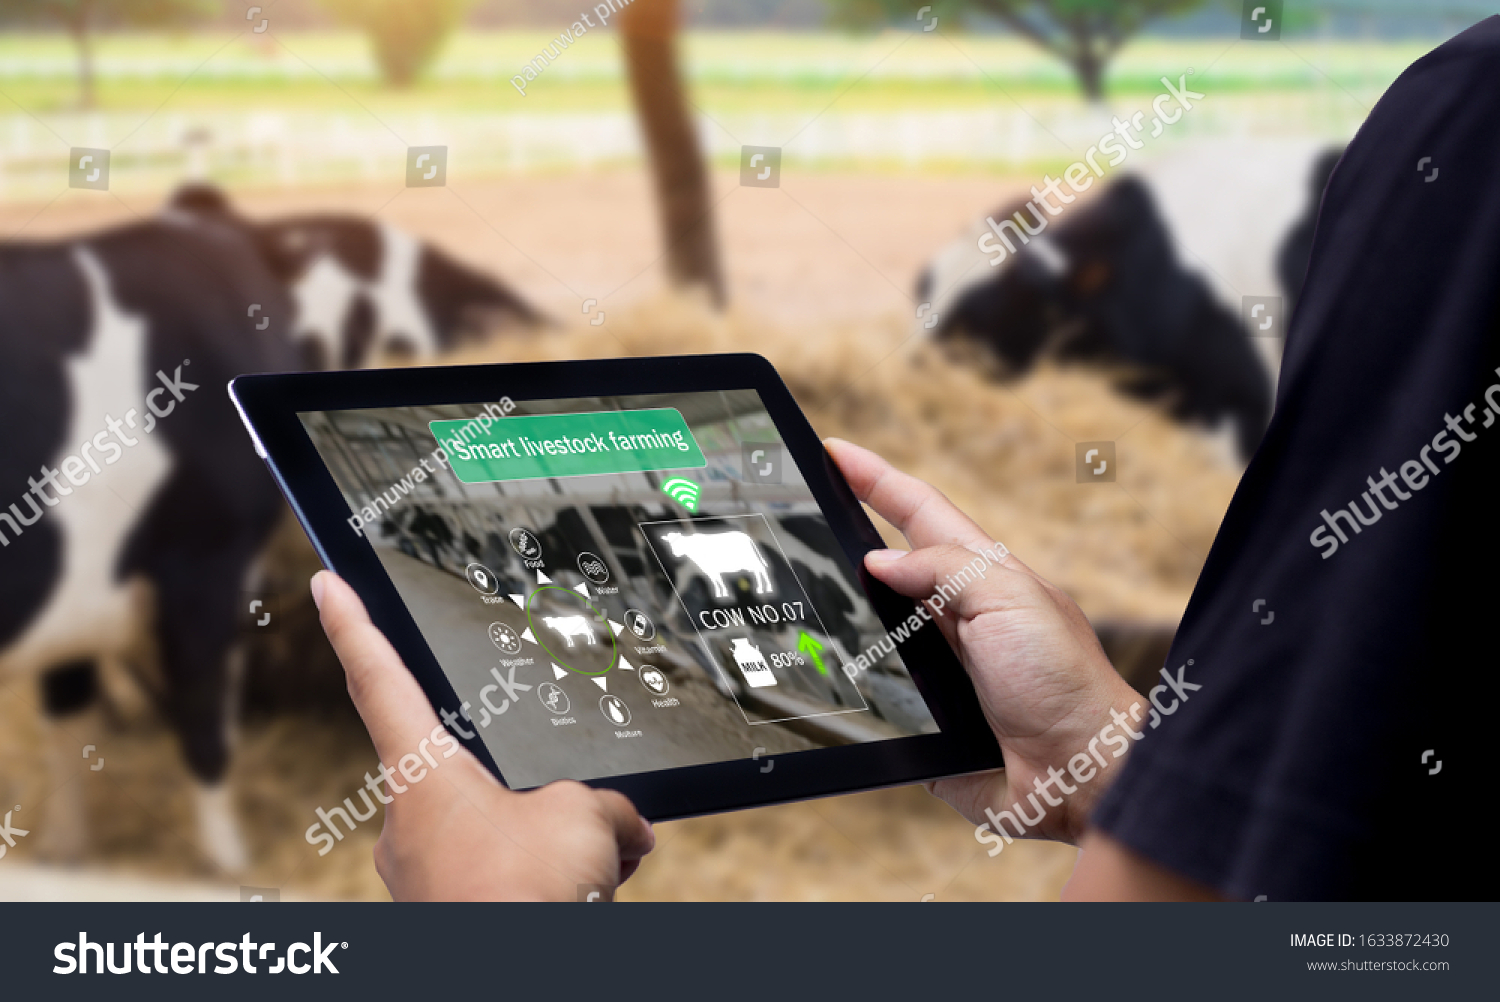 Smart Agritech livestock farming.Hands using digital tablet with blurred cow as background #1633872430